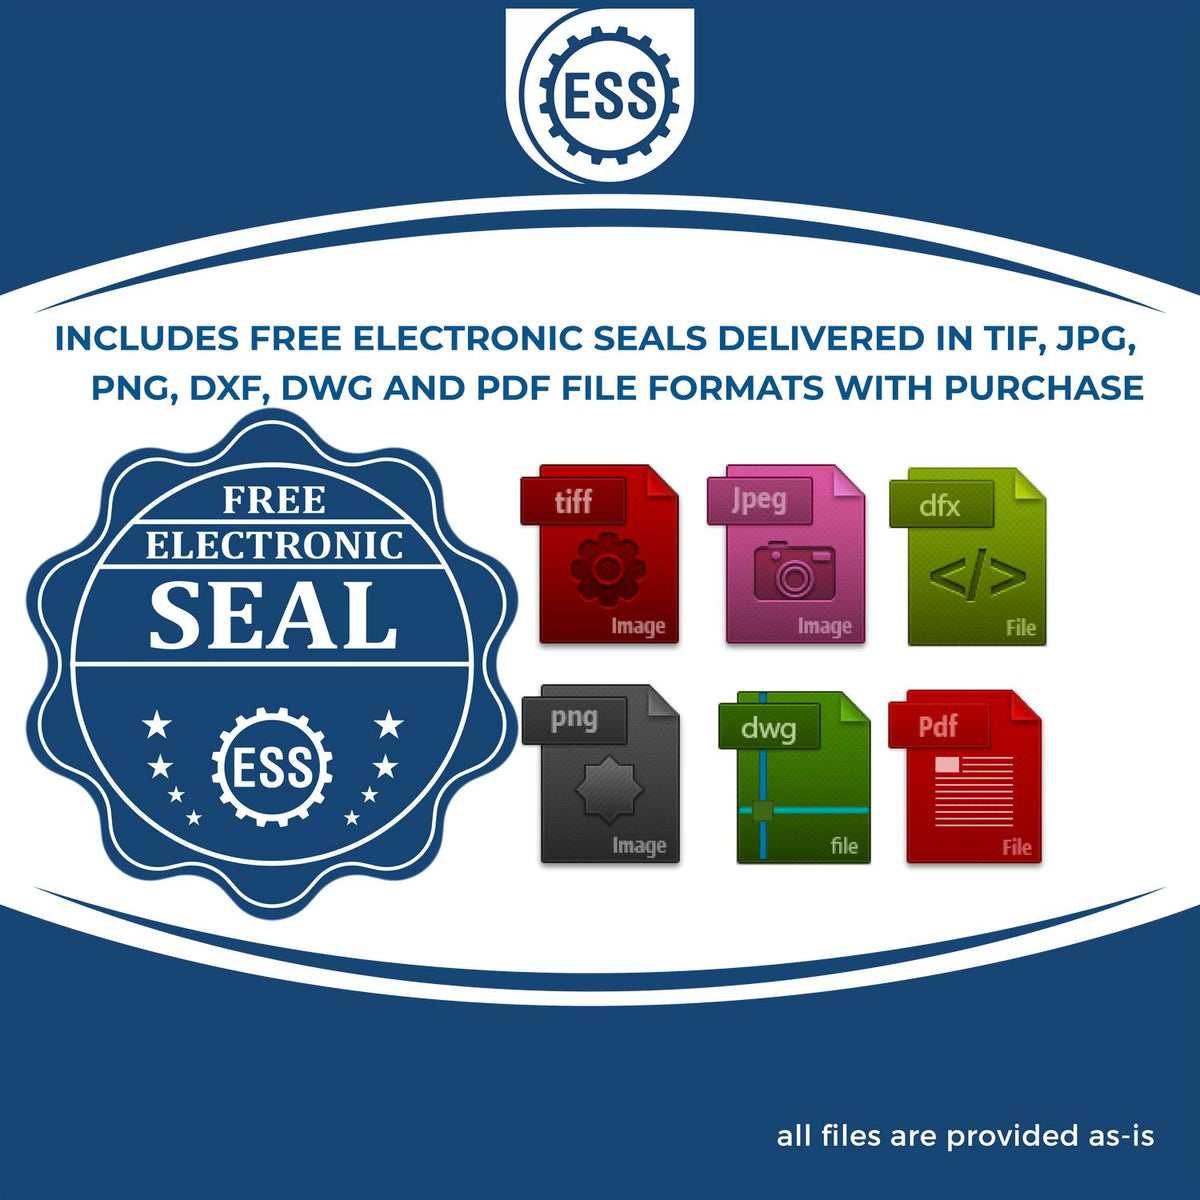 An infographic for the free electronic seal for the Soft Delaware Professional Engineer Seal illustrating the different file type icons such as DXF, DWG, TIF, JPG and PNG.